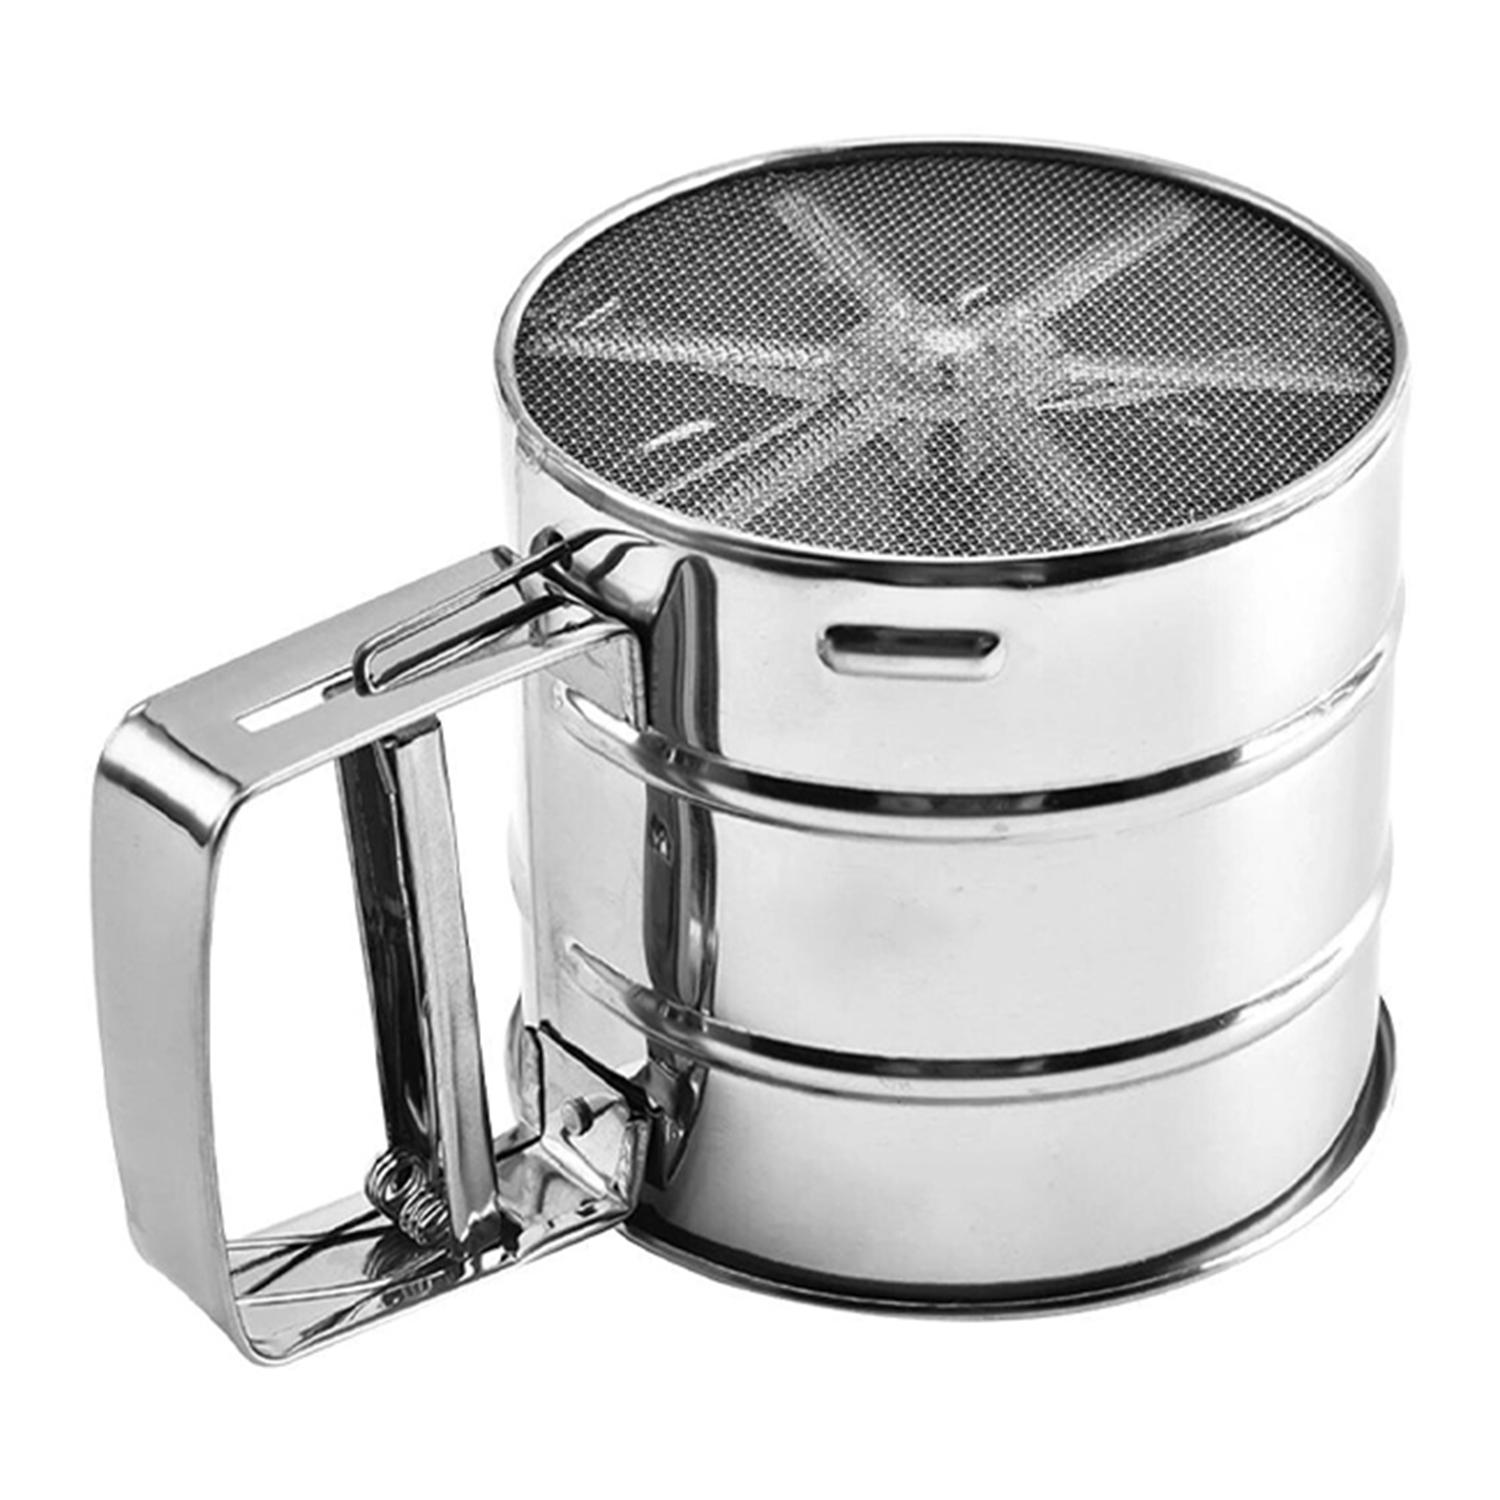 STAINLESS STEEL SHAKER SIEVE CUP MESH CRANK FLOUR SIFTER